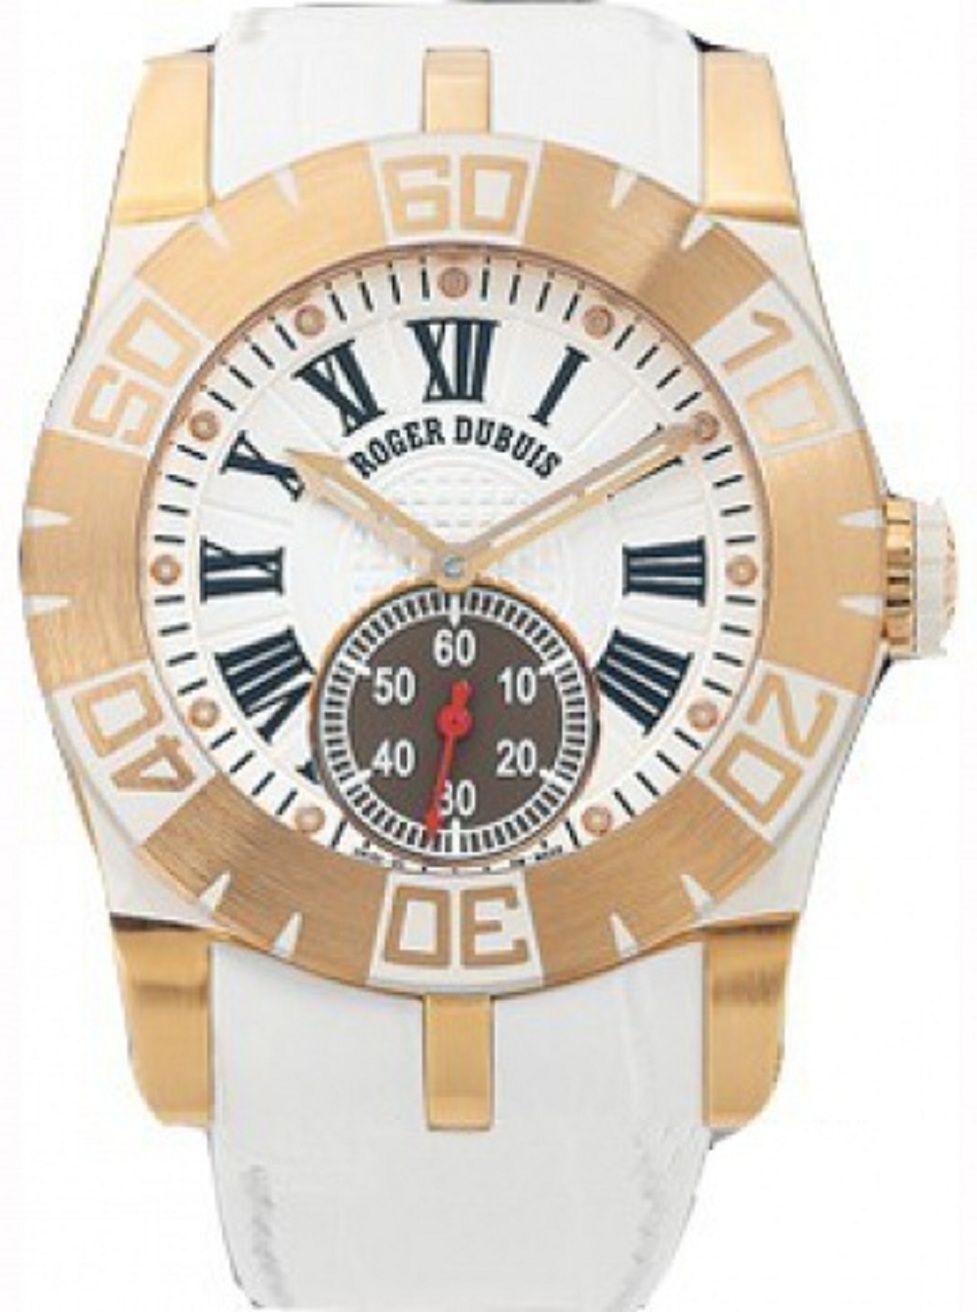 Easy Diver 40mm in Rose Gold -  Limited Edition 88 pcs. on White Leather Strap with White Dial